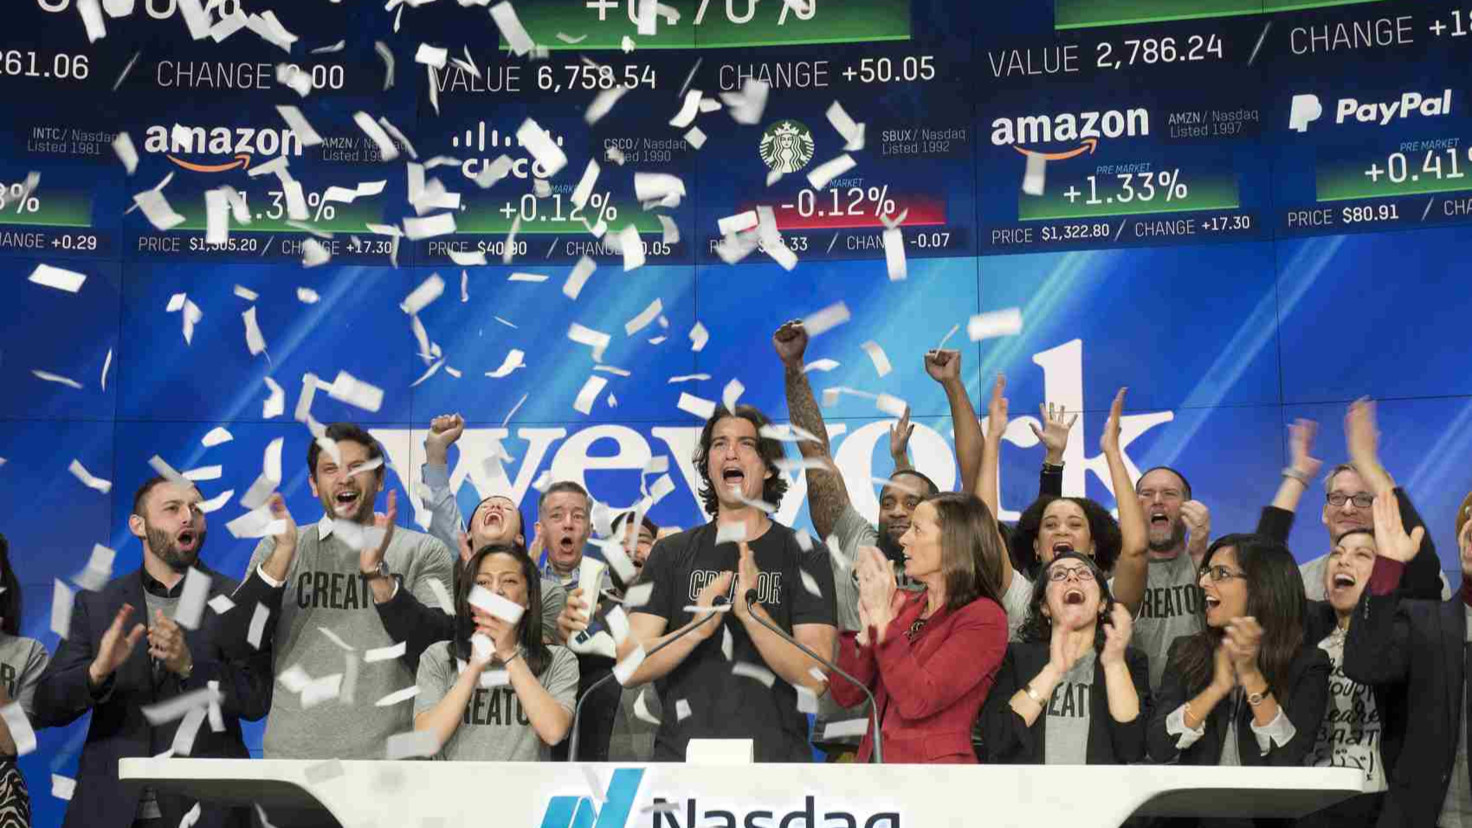 What happened to the WeWork IPO?